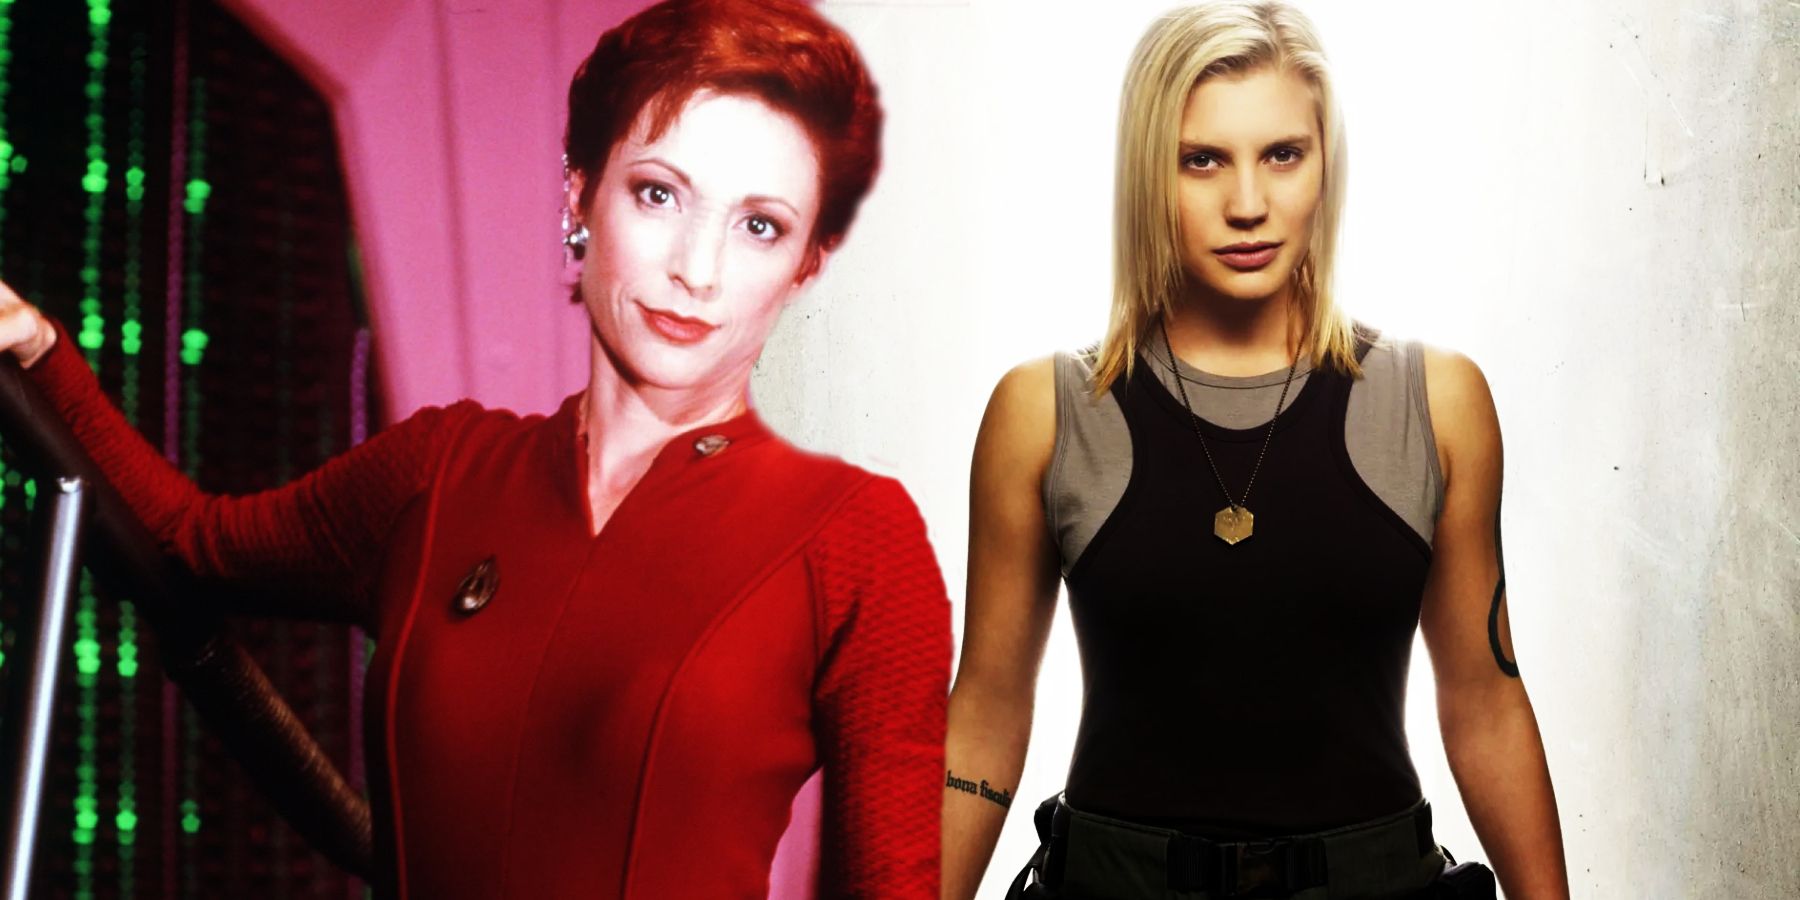 Kira Nerys was the inspiration for Kara Thrace a.k.a Starbuck in BSG